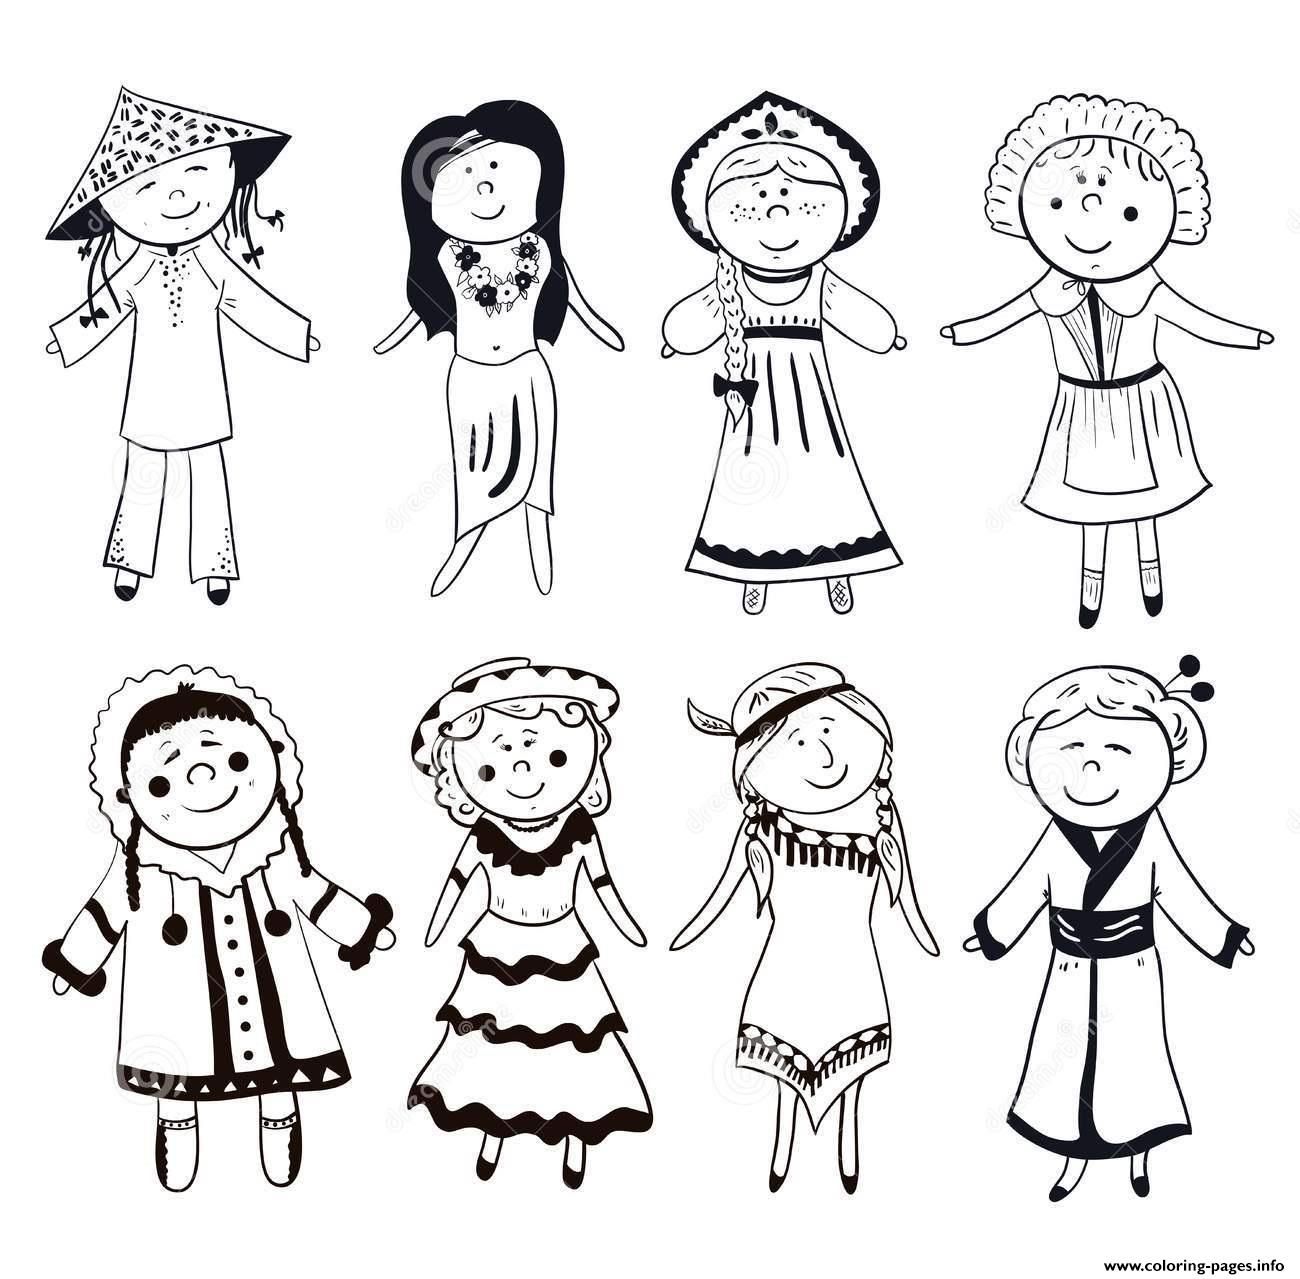 Diversity coloring pages coloring pages vietnamese traditional dress black and white